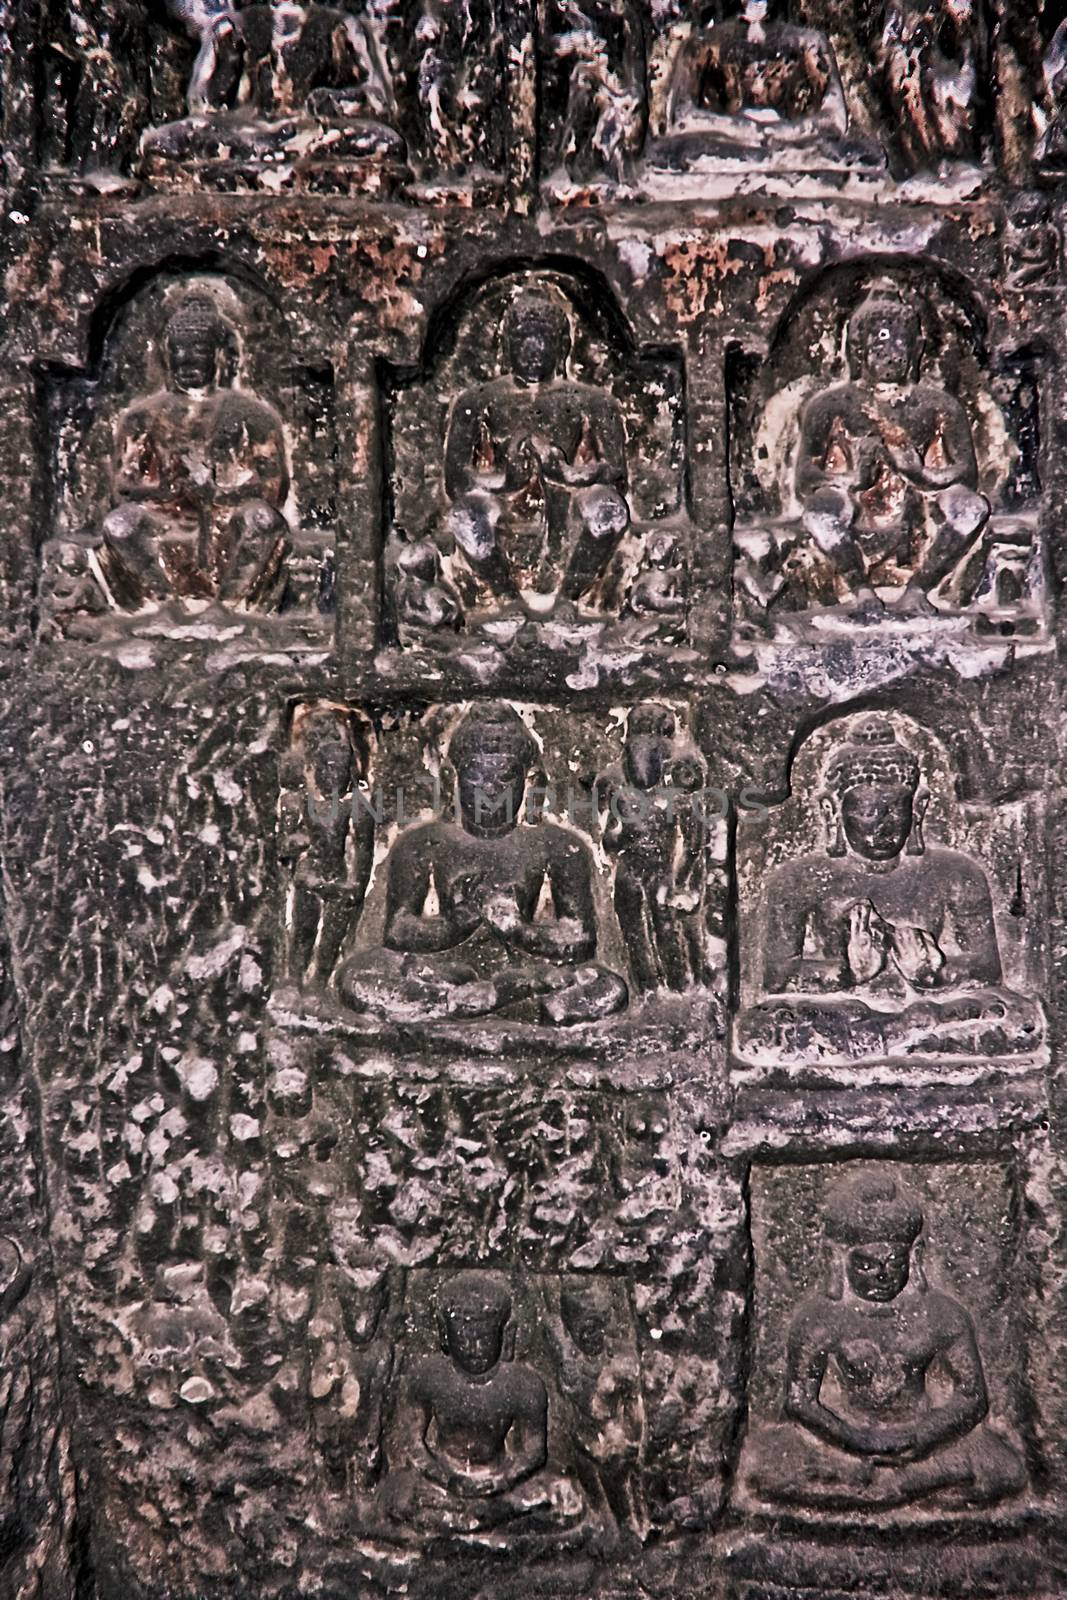 Miracle of Sravasti, Aurangabad Cave No. 2, where the Buddha transforms himself into a thousand Buddhas, Aurangabad, Maharashtra, India. The Aurangabad caves are 12 artificial rock-cut Buddhist shrines located on a hill running roughly east to west, nearly 2 km north from Bibi Ka Maqbara in Aurangabad, Maharashtra, India. The Aurangabad Caves were dug out of comparatively soft basalt rock during the 6th and 7th century. Caves are divided into three separate groups depending on their location.